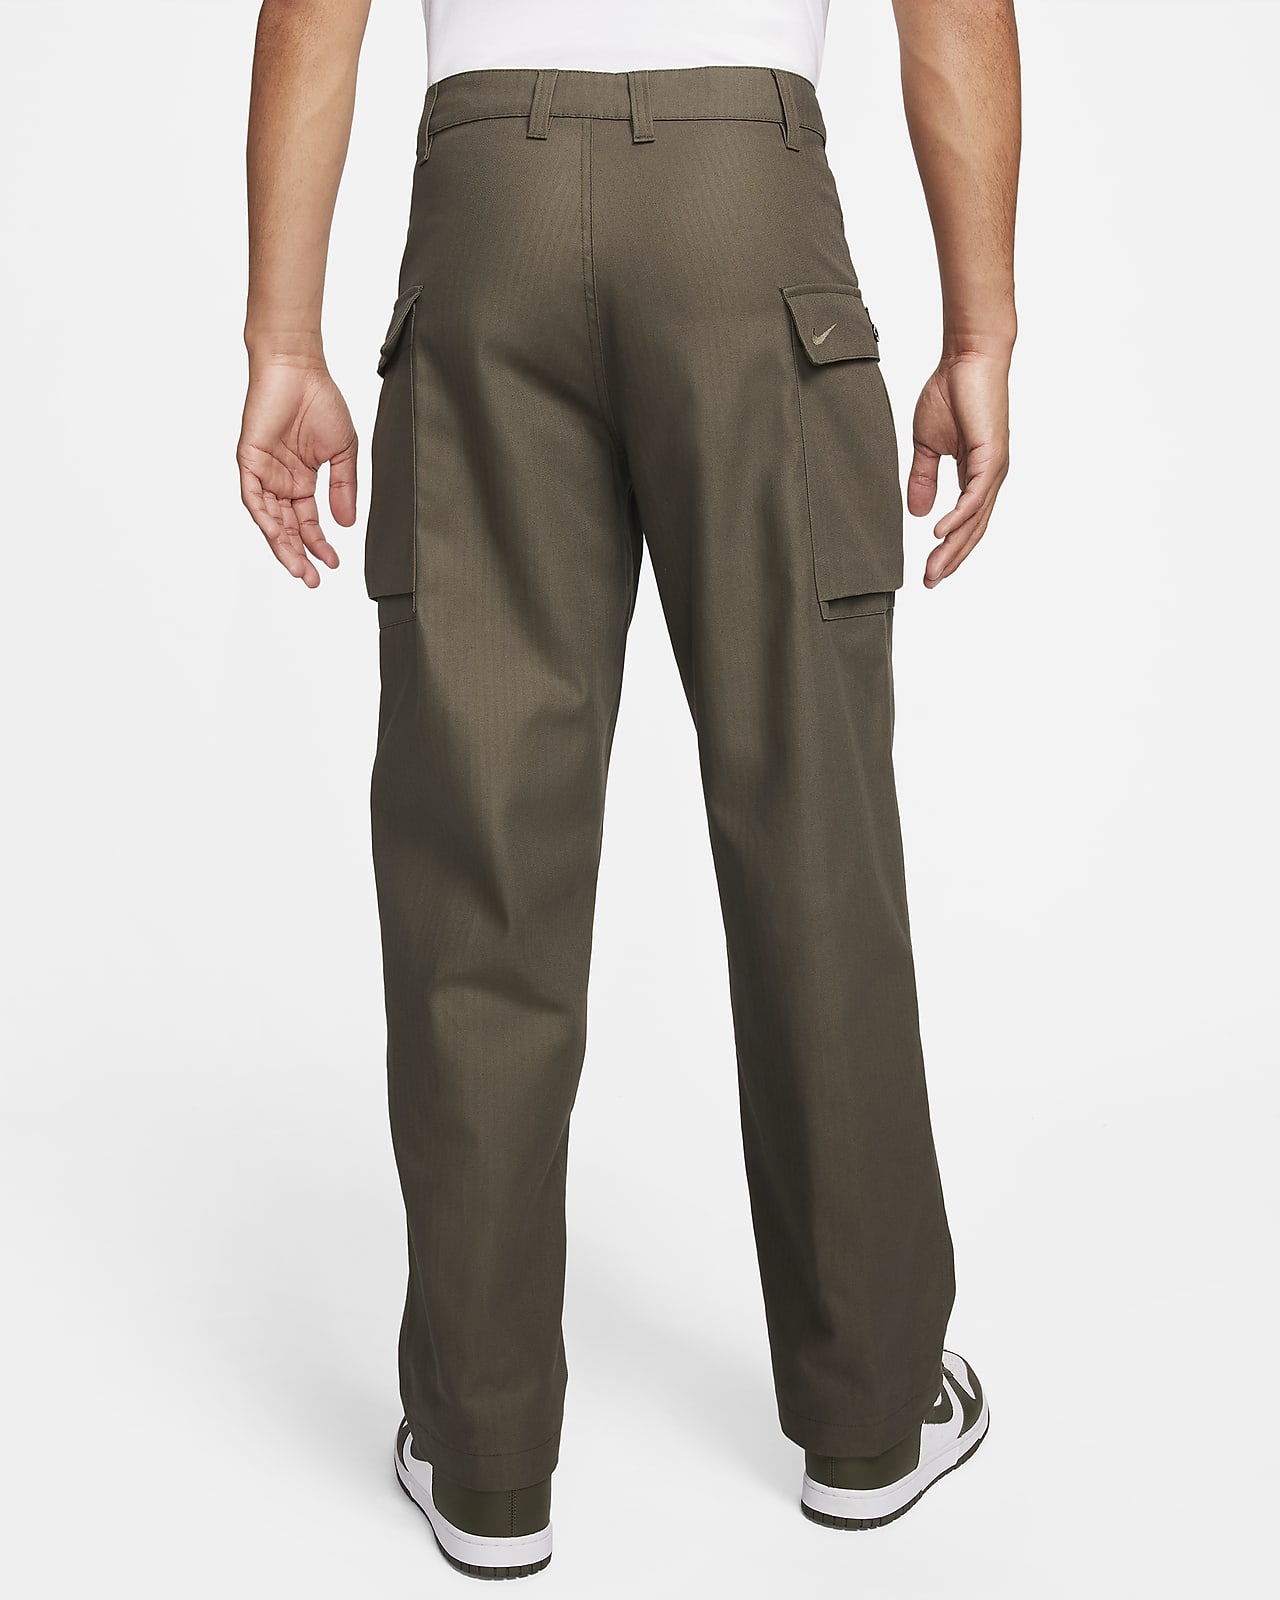 Nike Sportswear Reissue Track Pant | Track pants mens, Nike clothes mens,  Pants outfit men